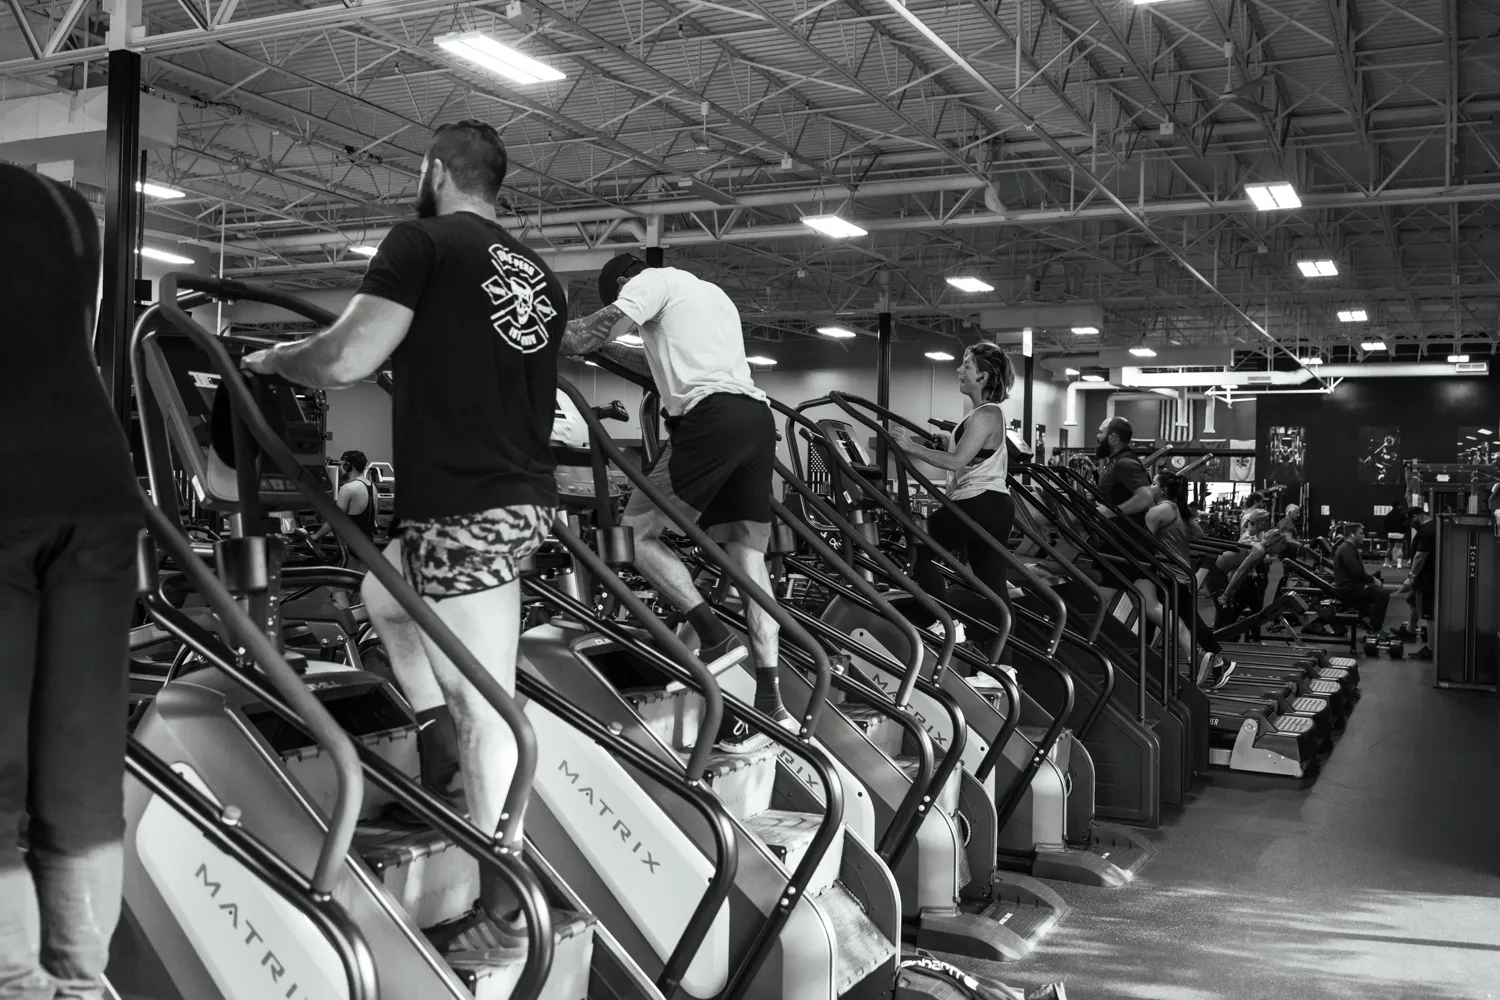 Gym members using cardio machines at The Mecca Gym located in Boise, Idaho.